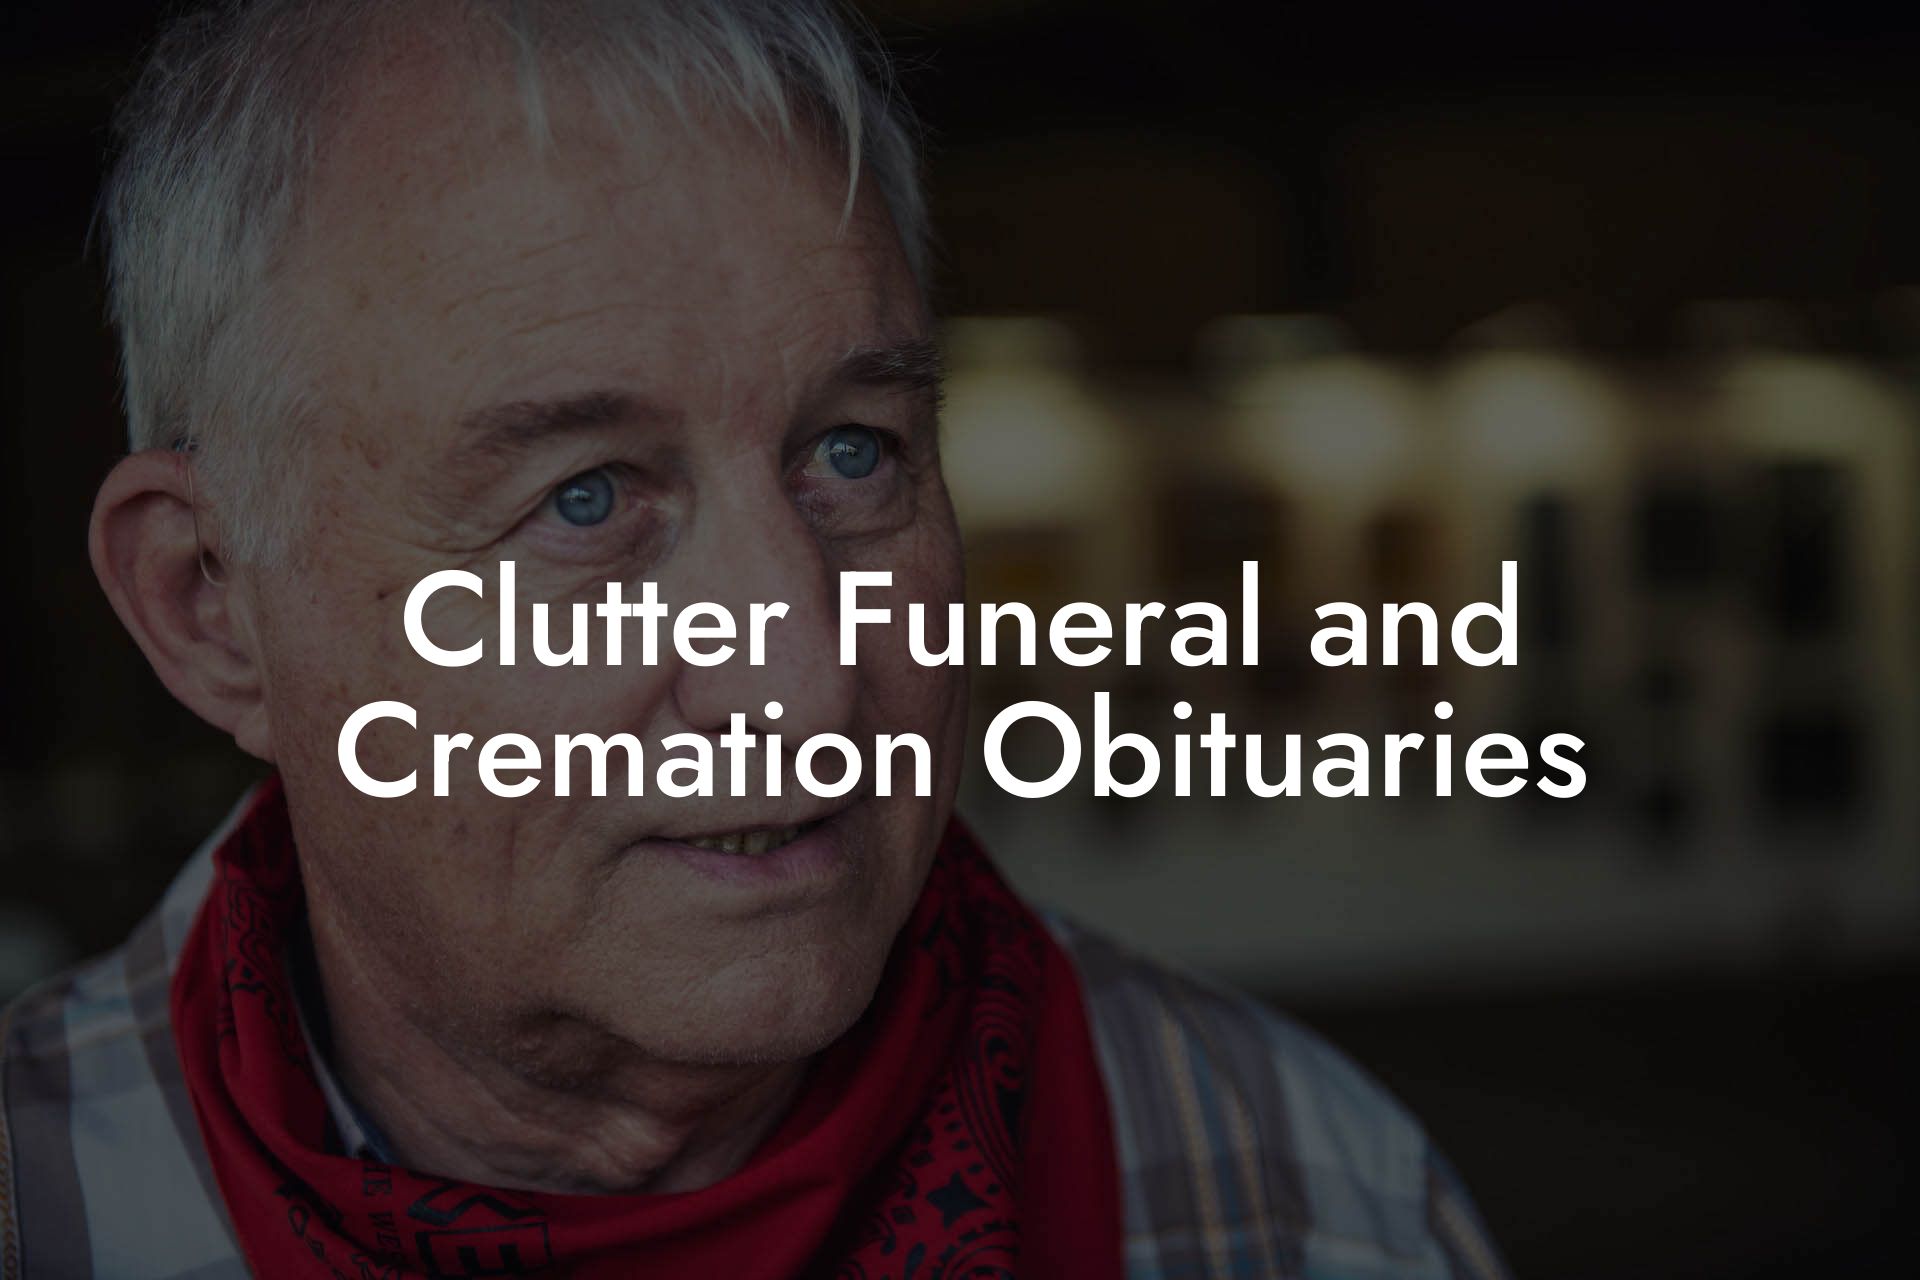 Clutter Funeral and Cremation Obituaries